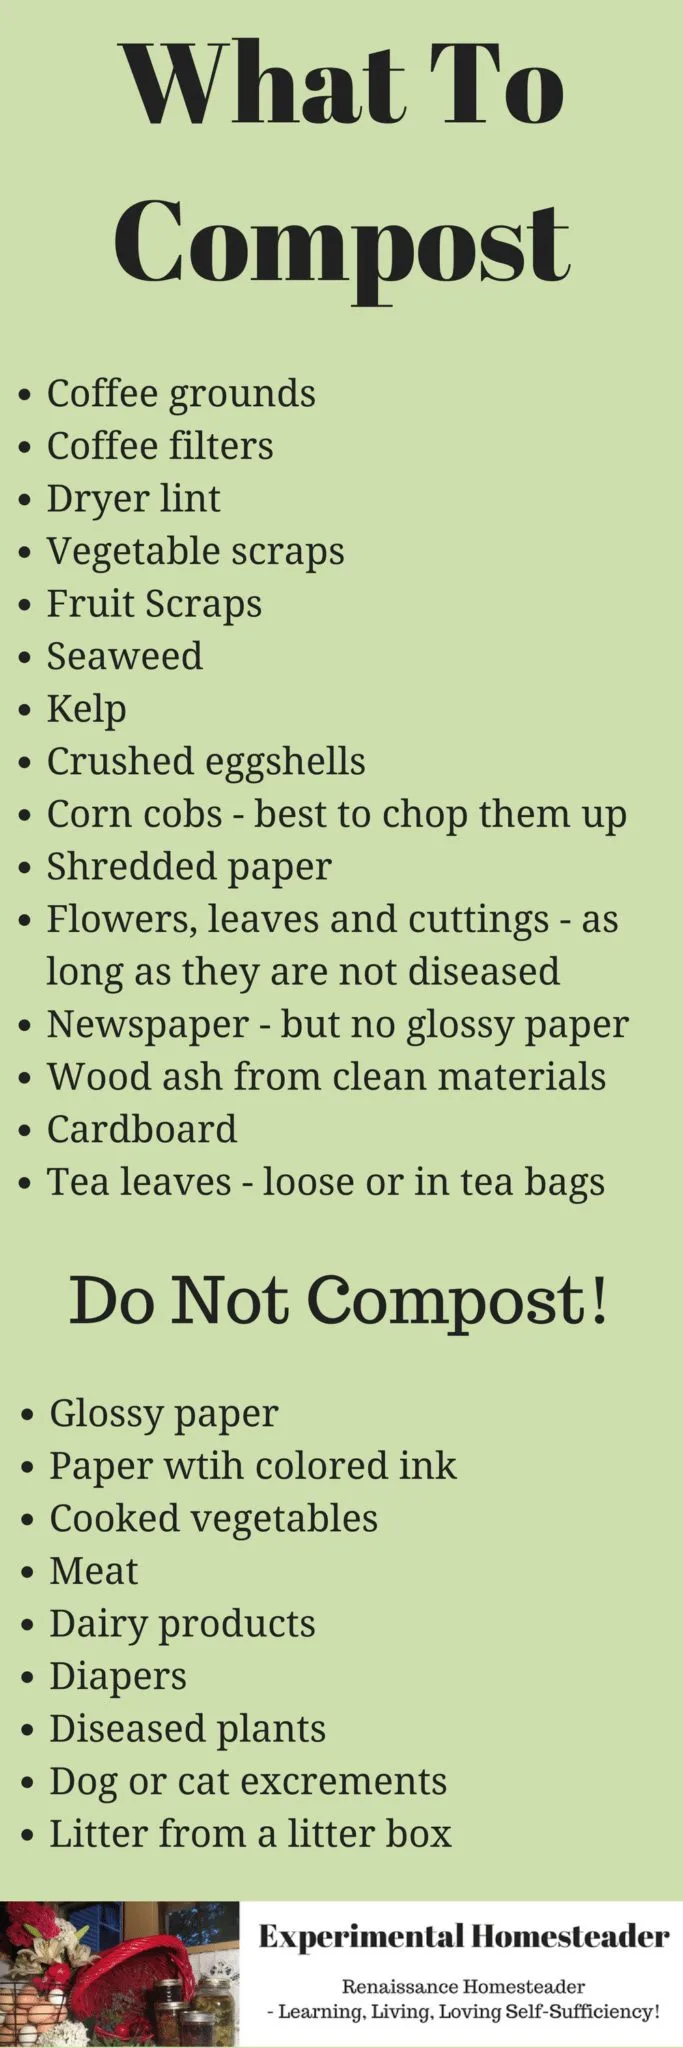 A printable list of what to compost.